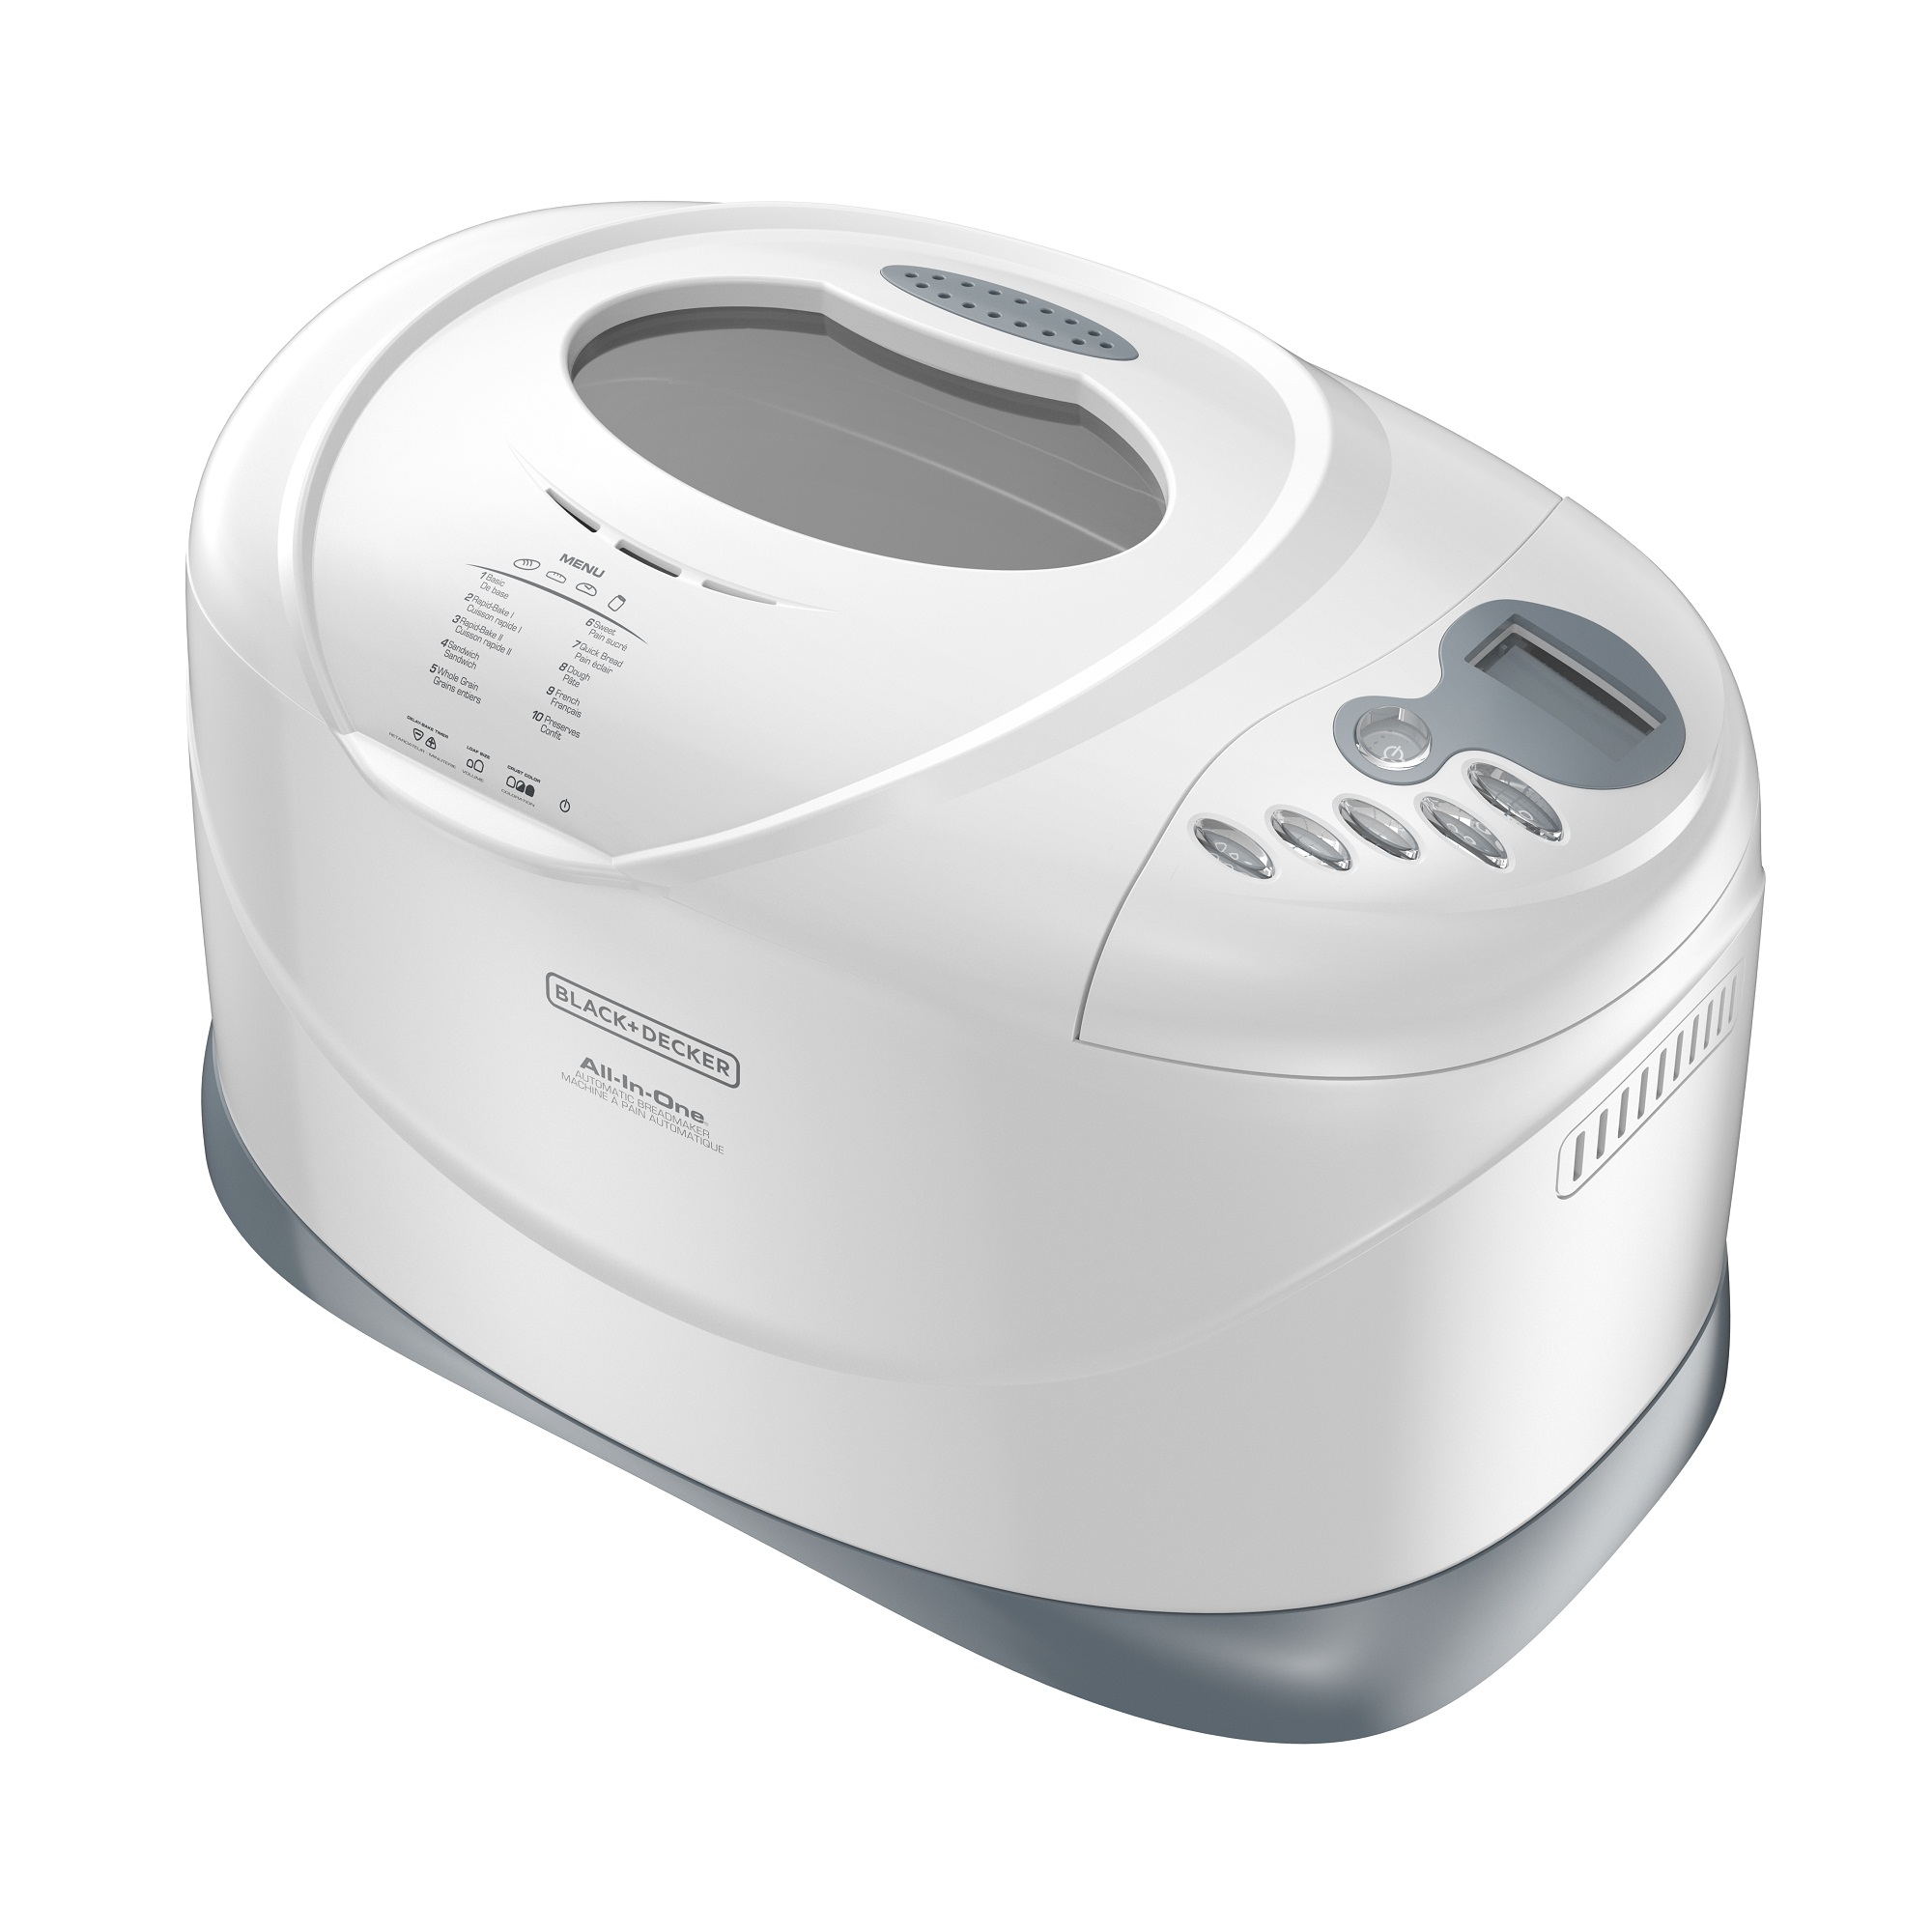 Patioer 3.3LB Bread Maker Machine Automatic Bread Machine with Dual  Kneading Paddles 15-in-1 Breadmaker Dough Maker with Gluten Free Setting, 3  Loaf